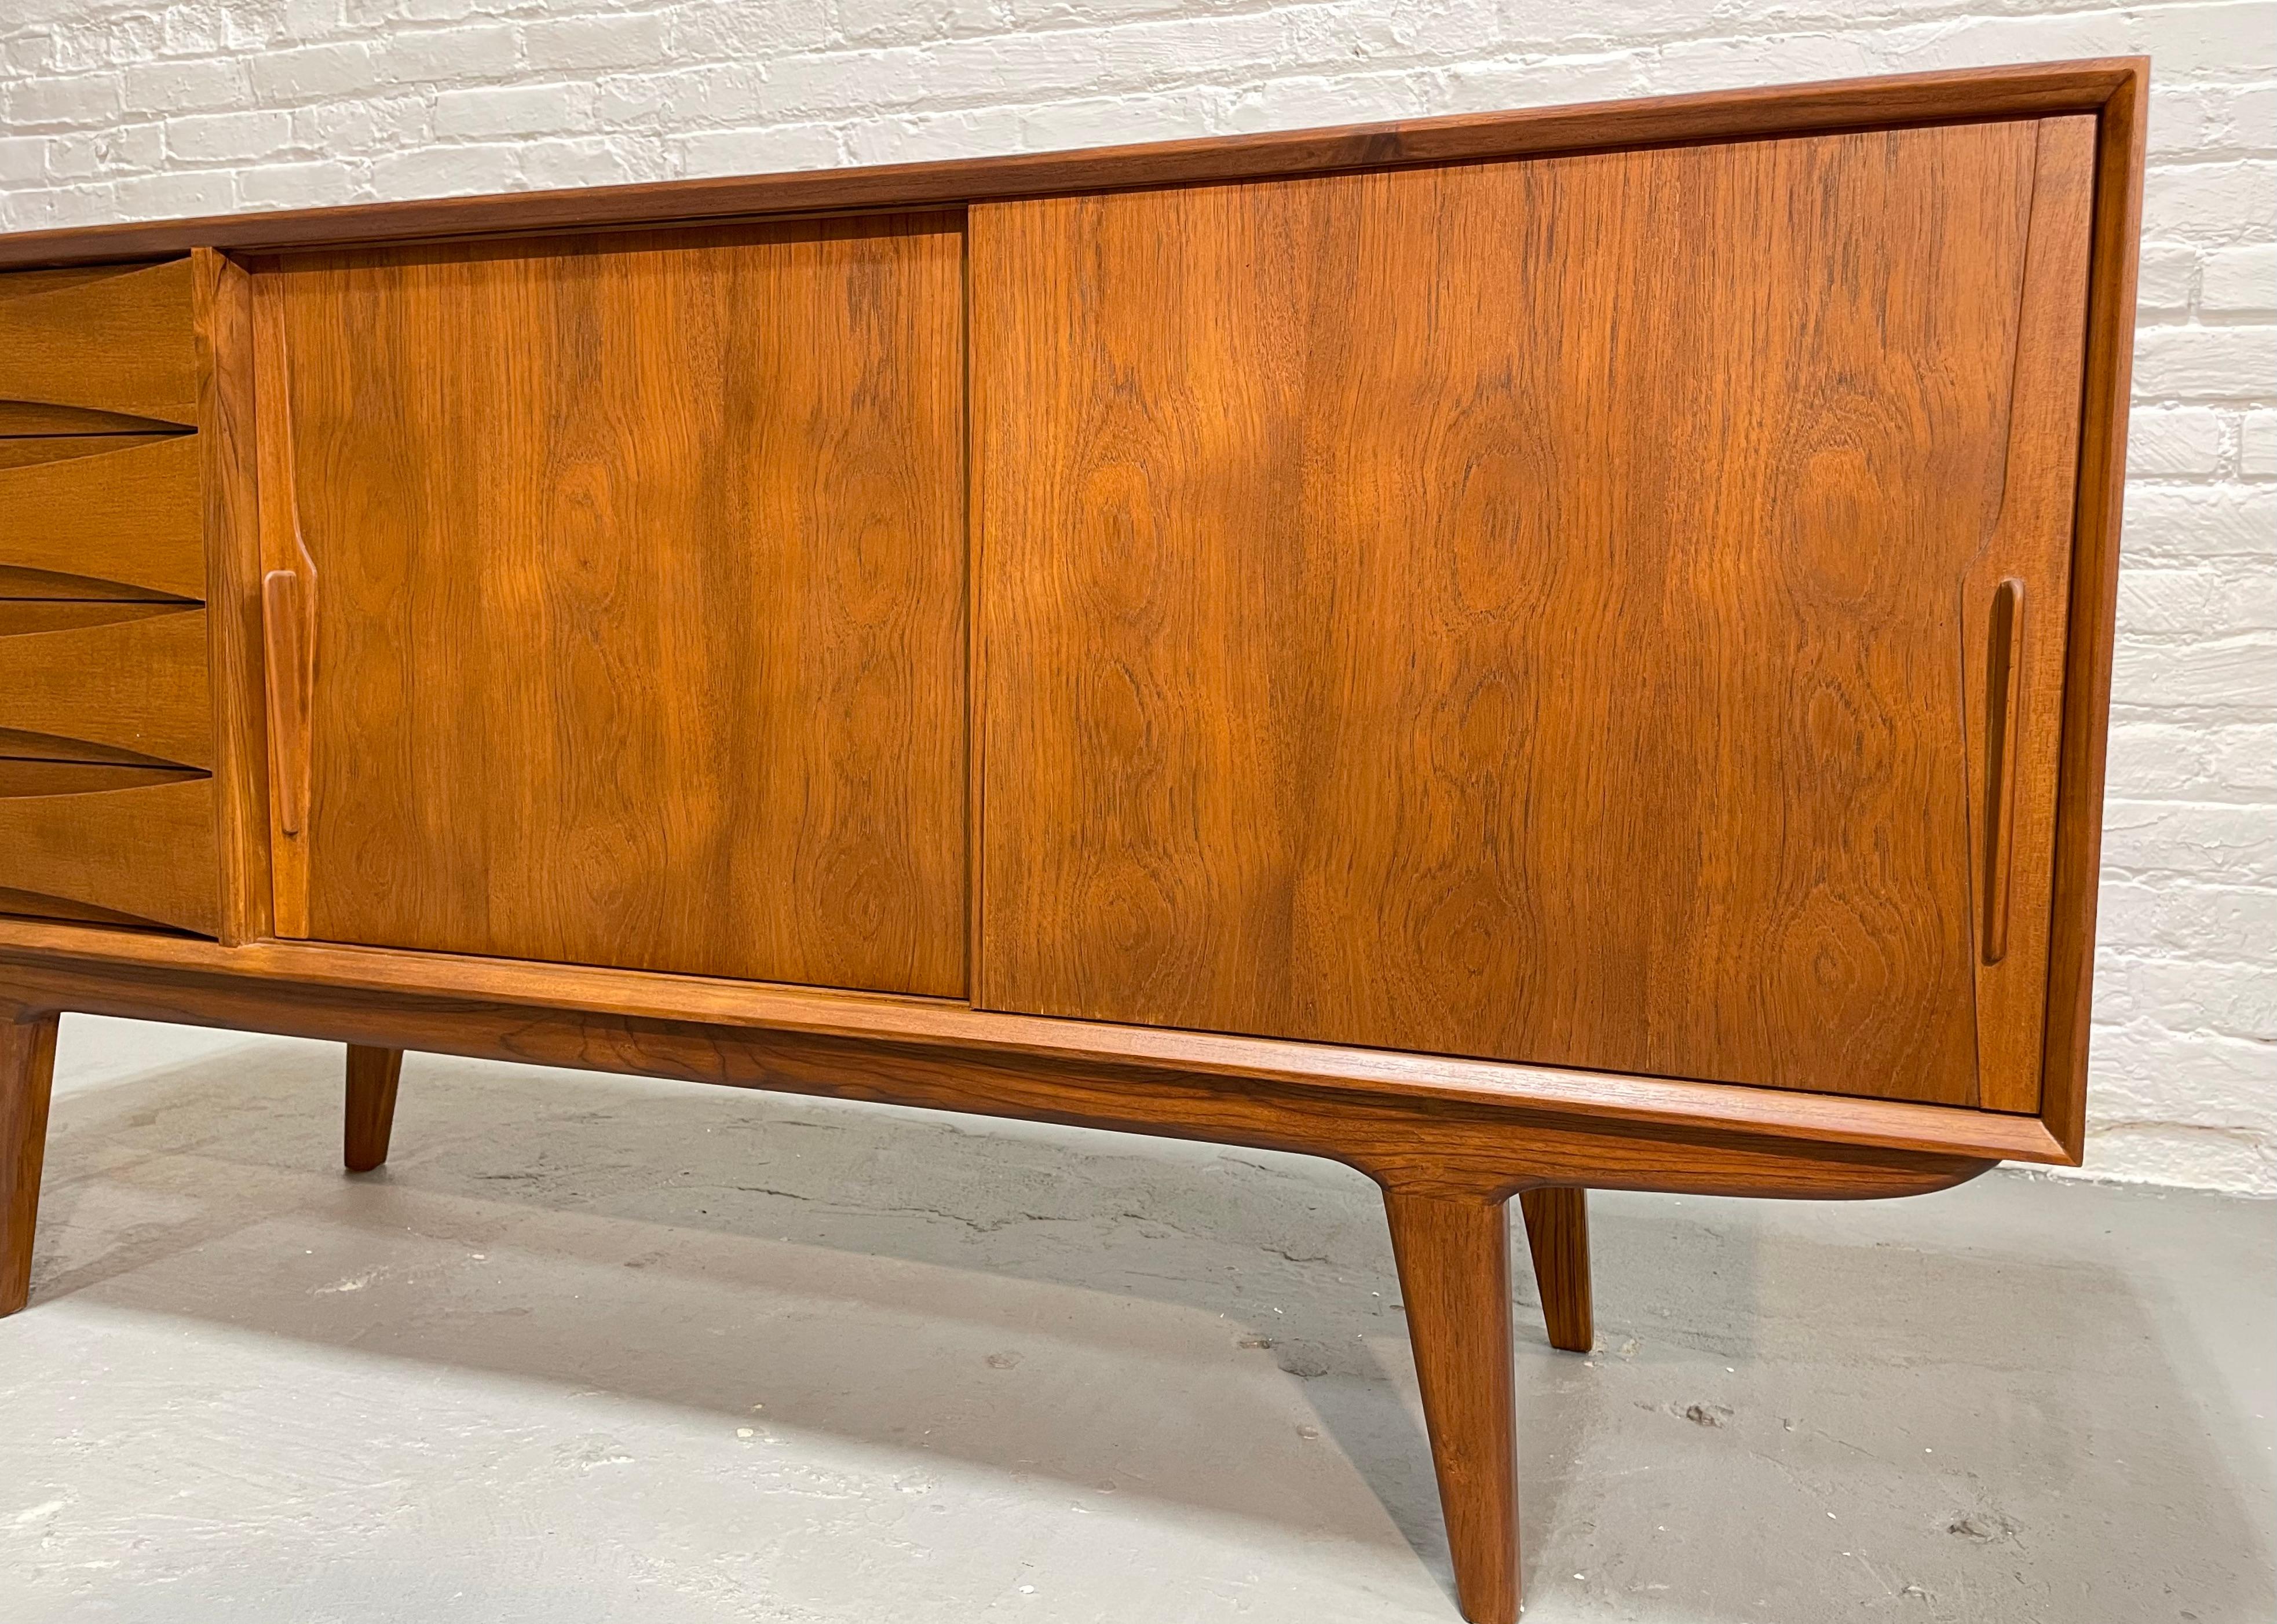 Wood  Handsome Mid Century MODERN styled SIDEBOARD / CREDENZA media stand